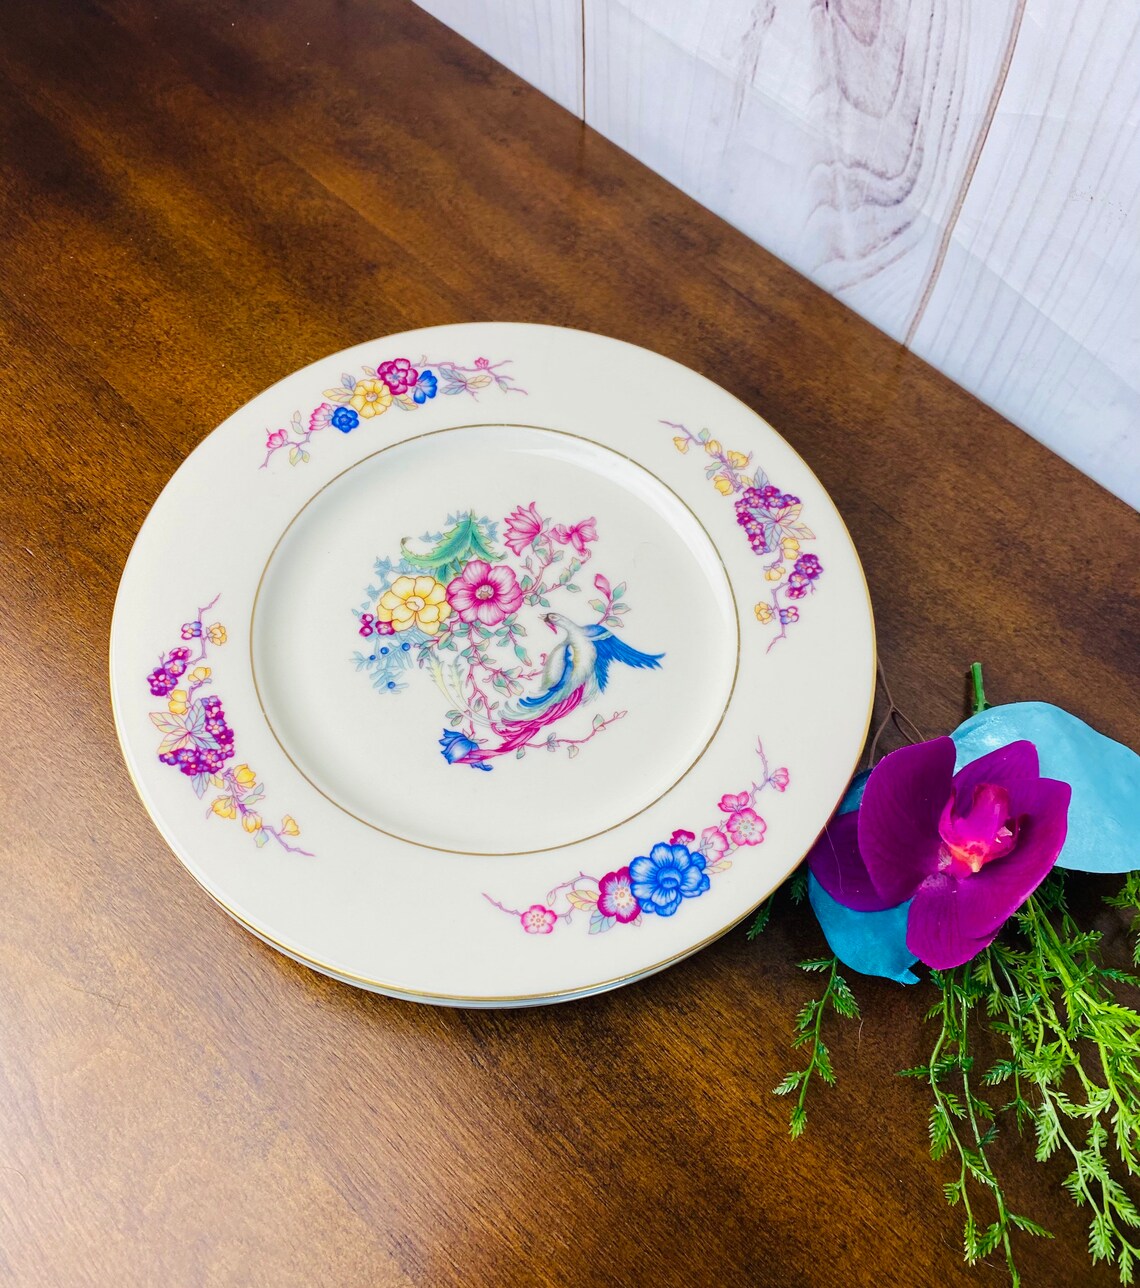 Vintage Pink and Blue Ceramic Salad Plates with Gold Trim | Etsy